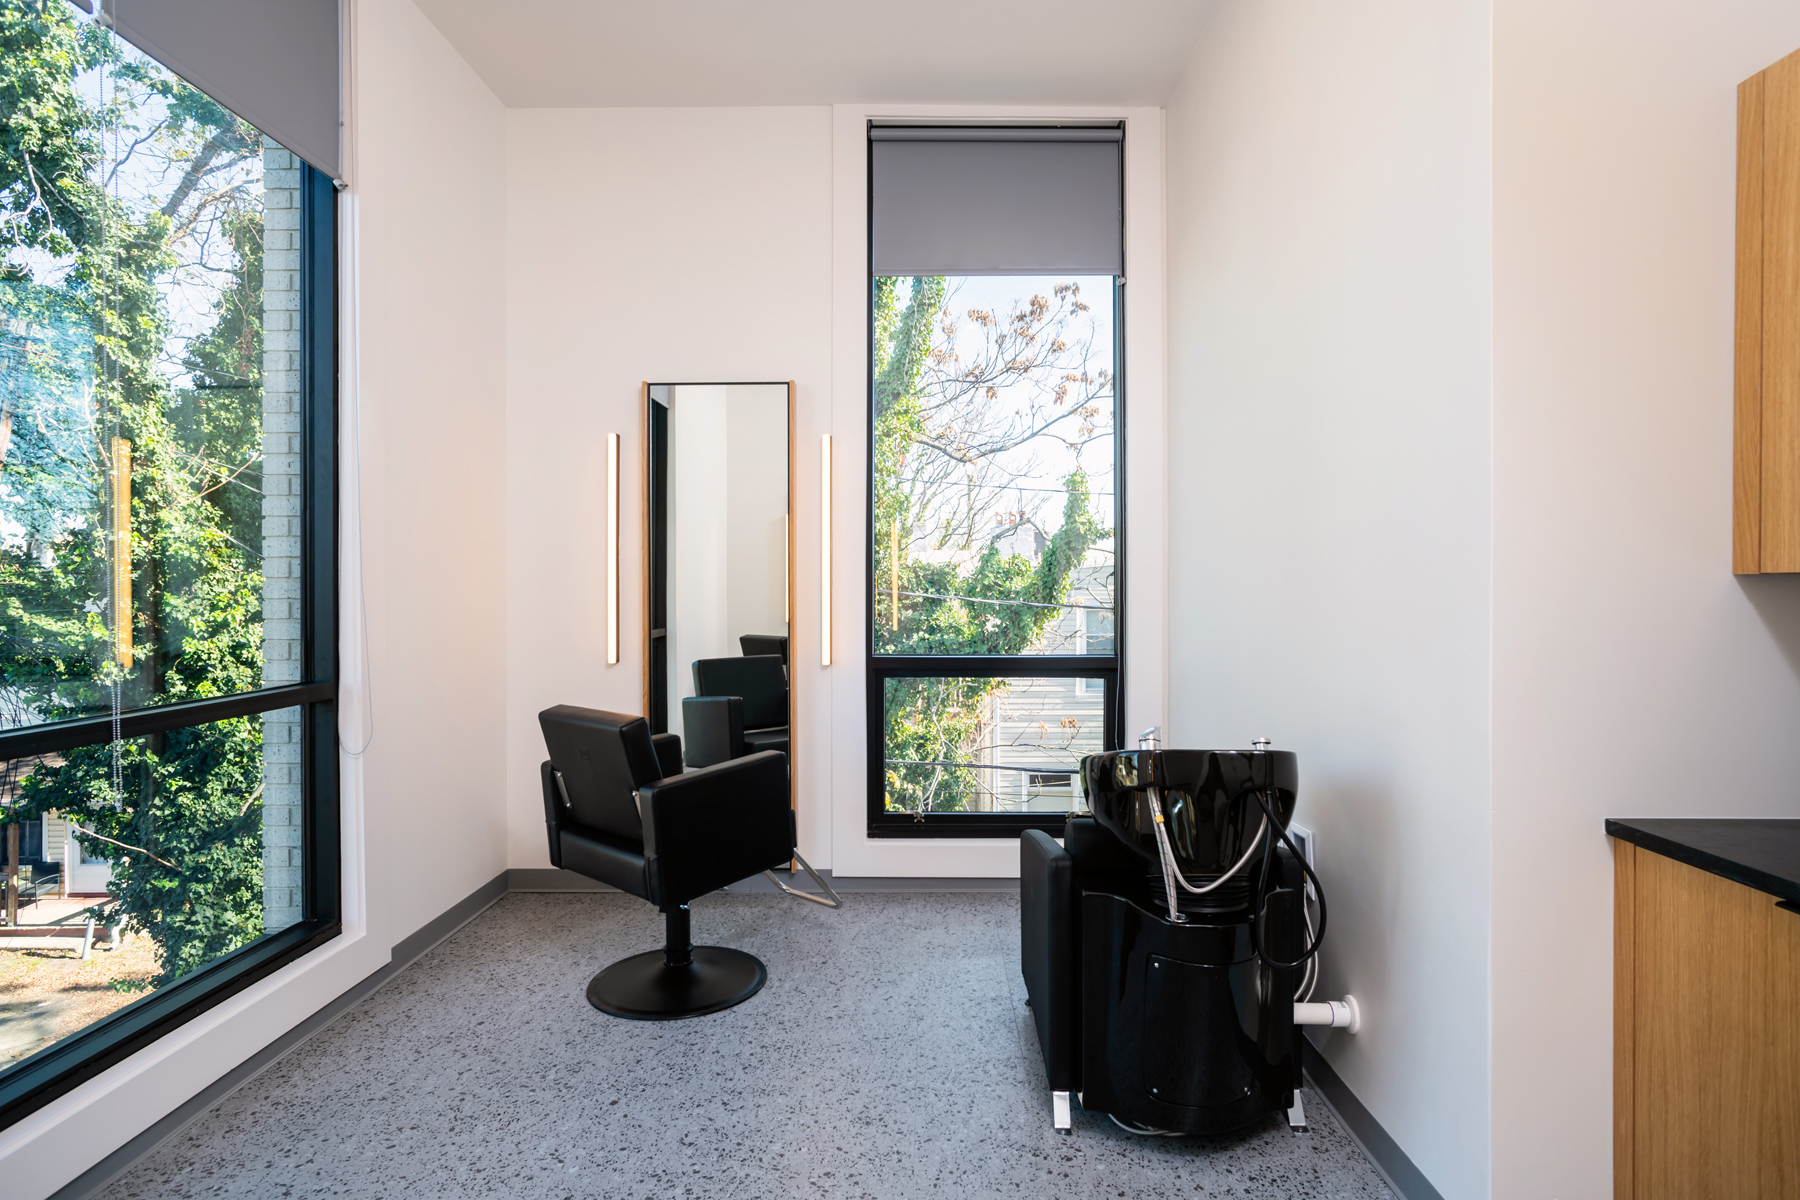 Hive Salon Studios Revolutionizes the Beauty Industry with State-of-the-Art Hair Studio Spaces for Rent